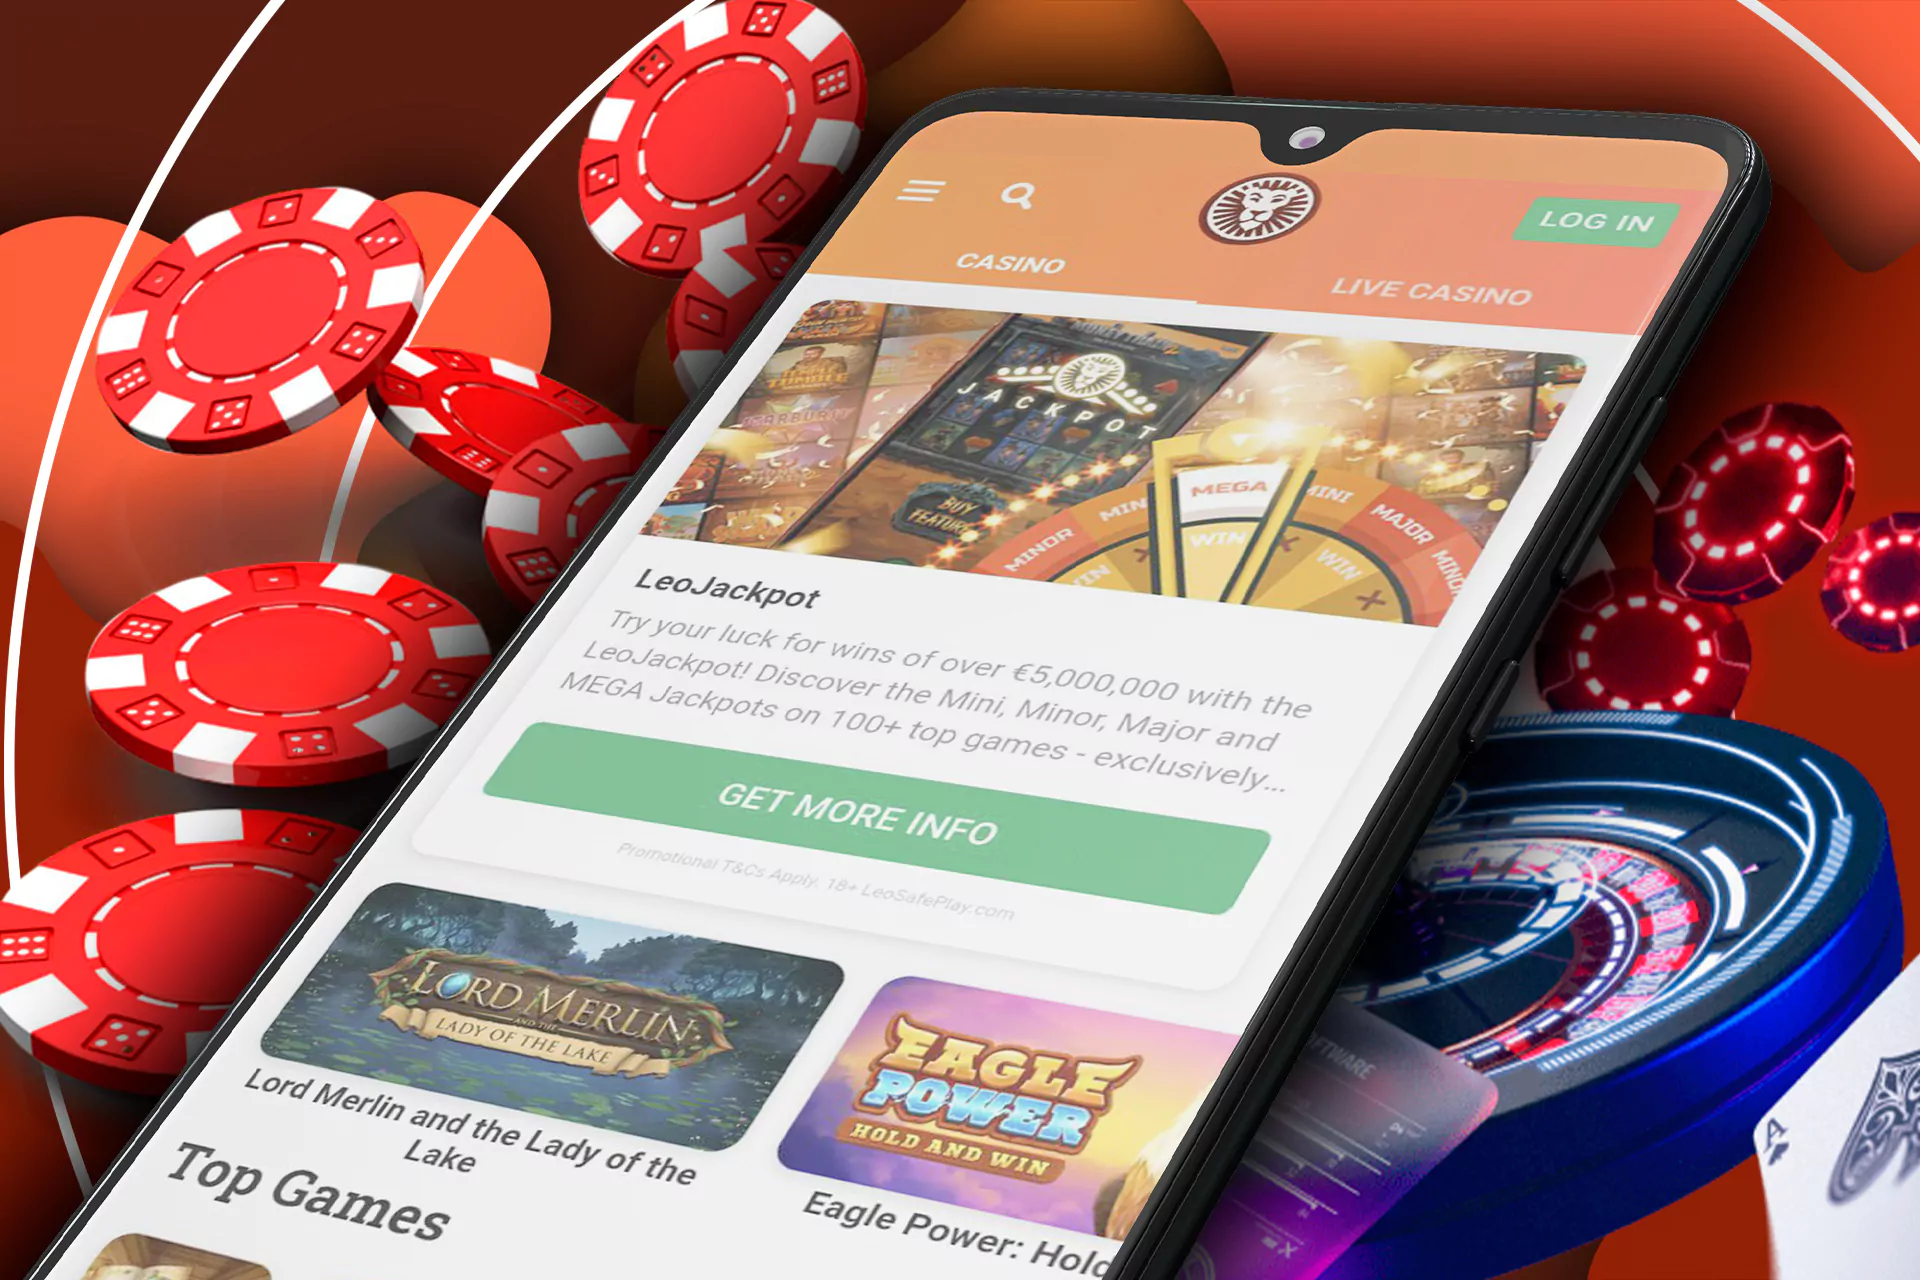 Play your favorite games in the Casino section.